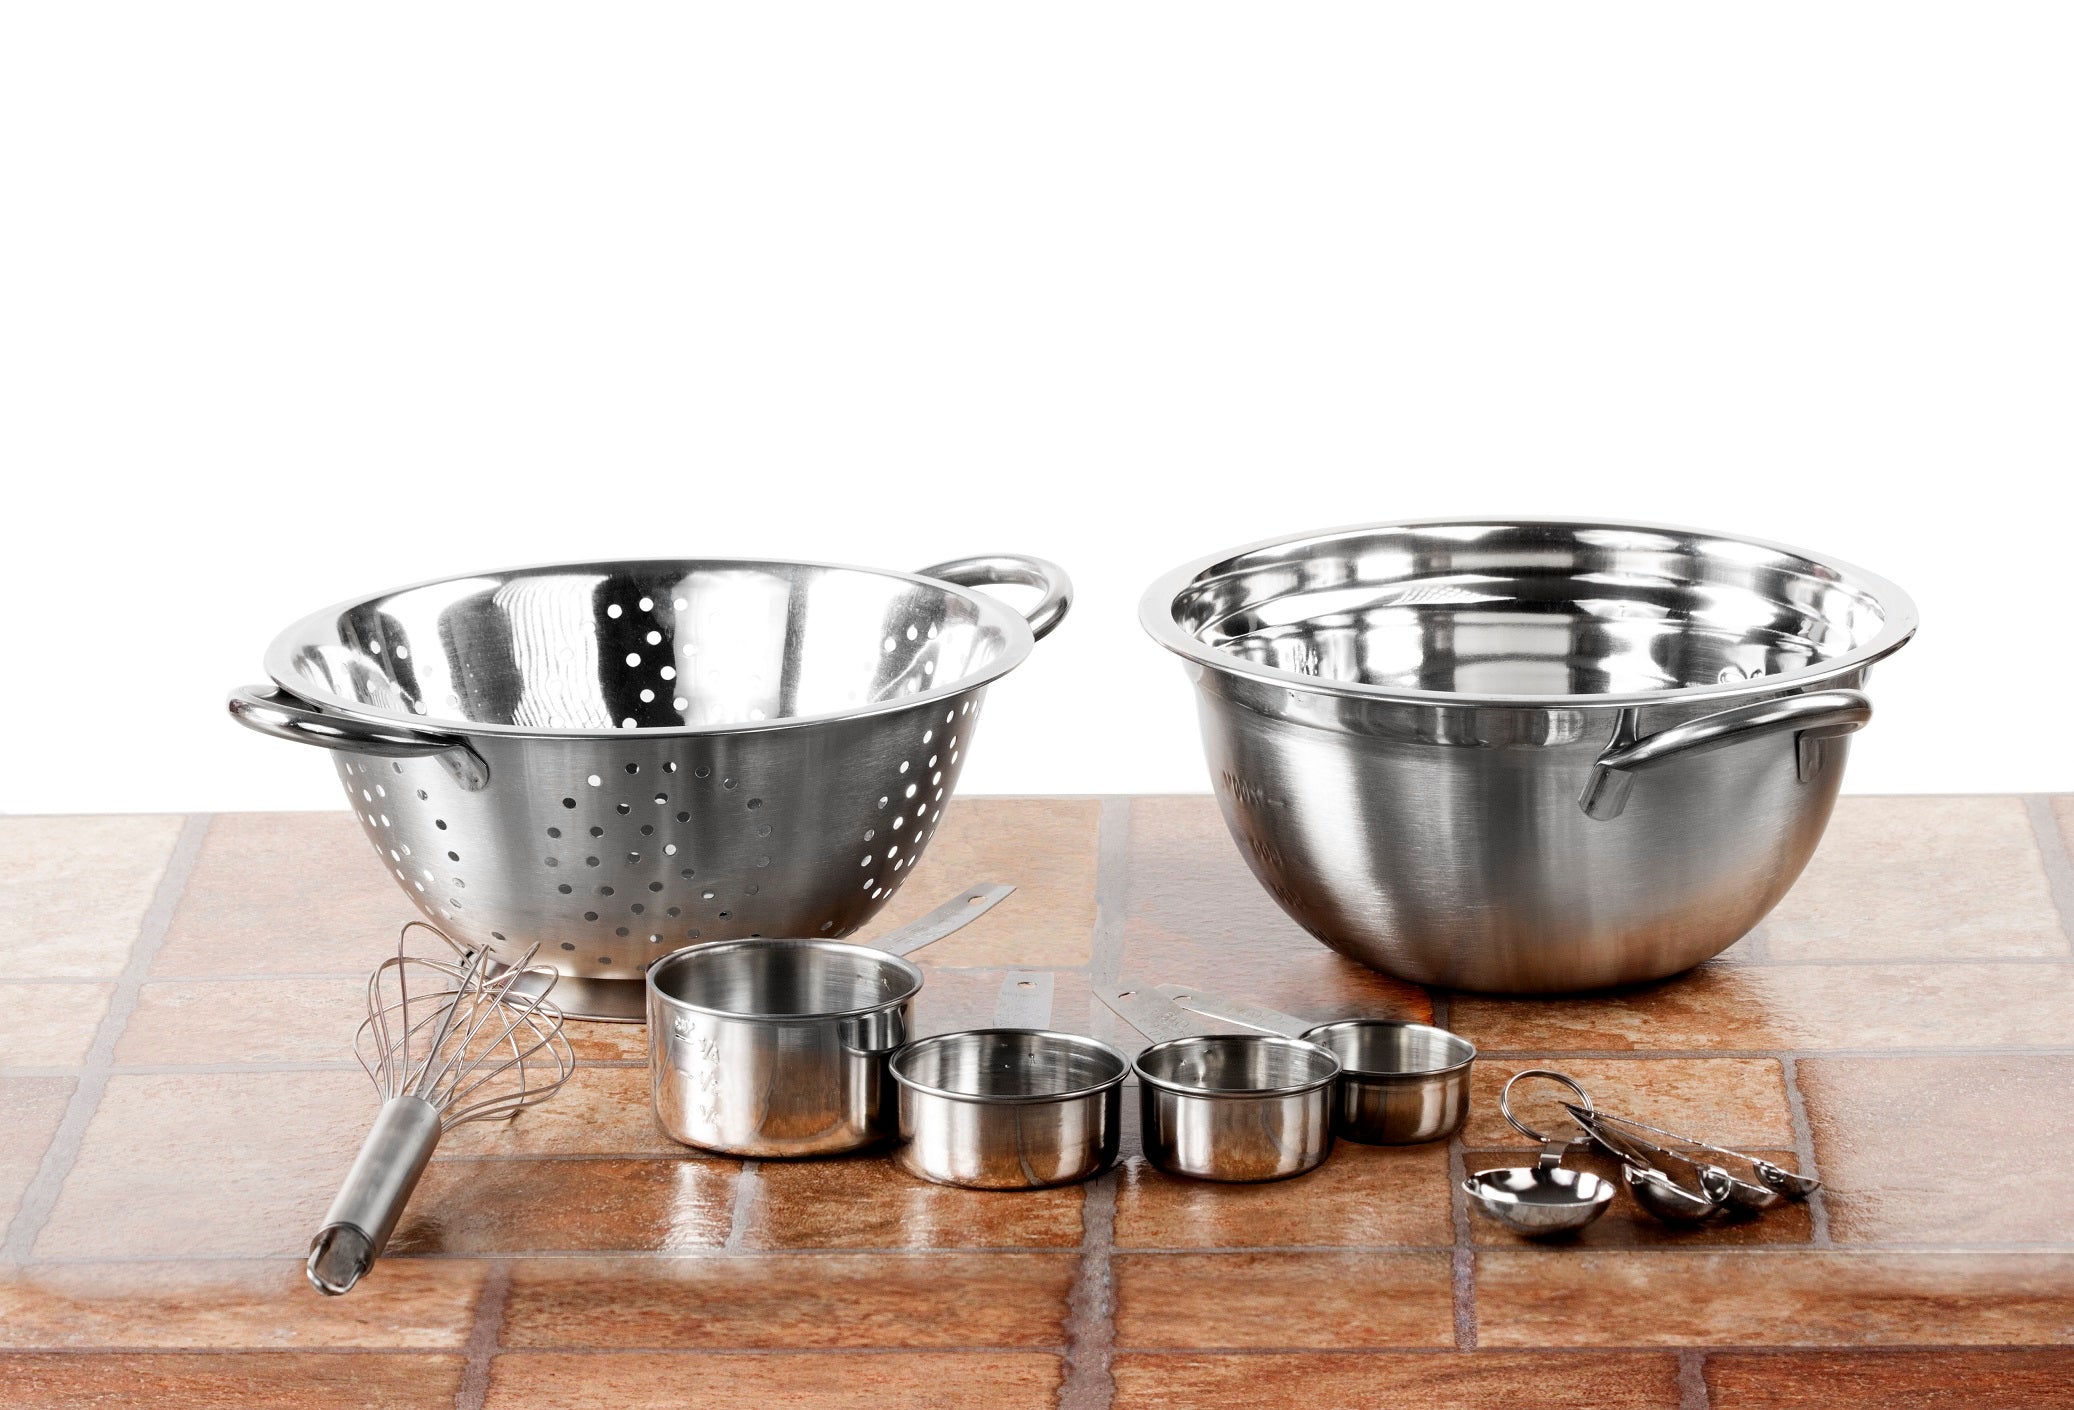 Lexi Home Heavy Duty Stainless Steel German Mixing Bowl Set - 3 Large Nested Mixing Bowls